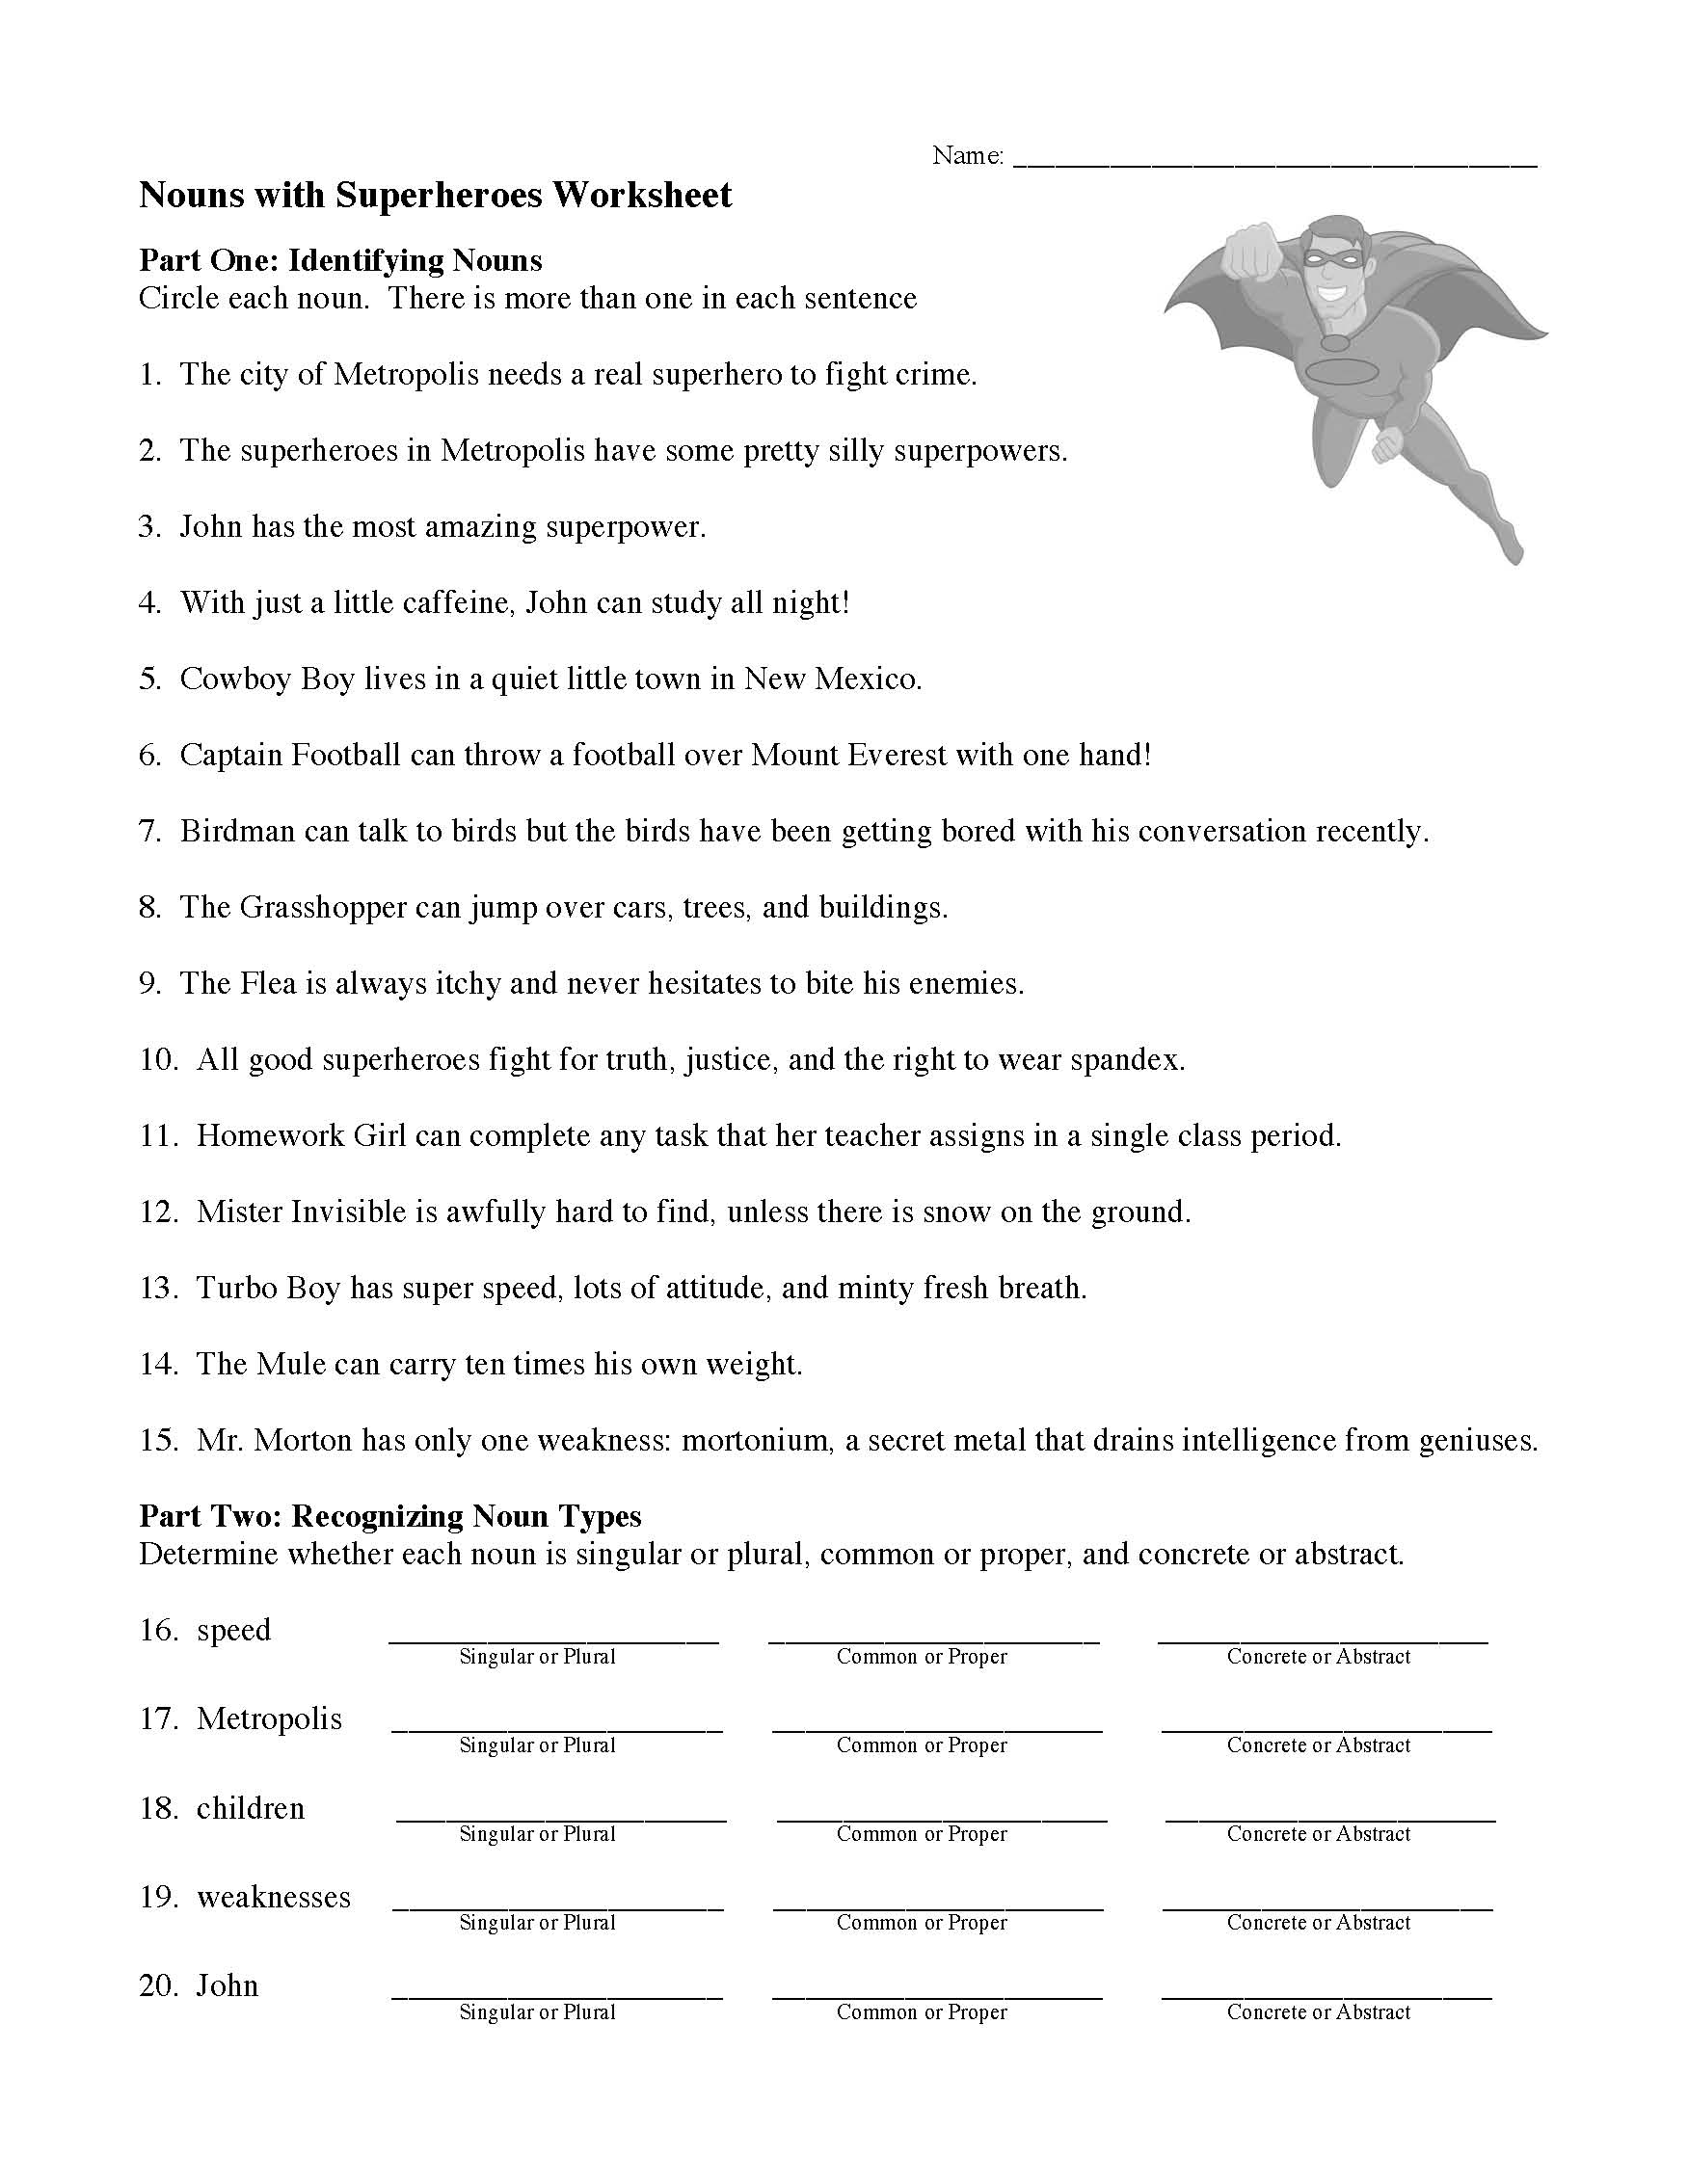 nouns-and-superheroes-worksheet-preview